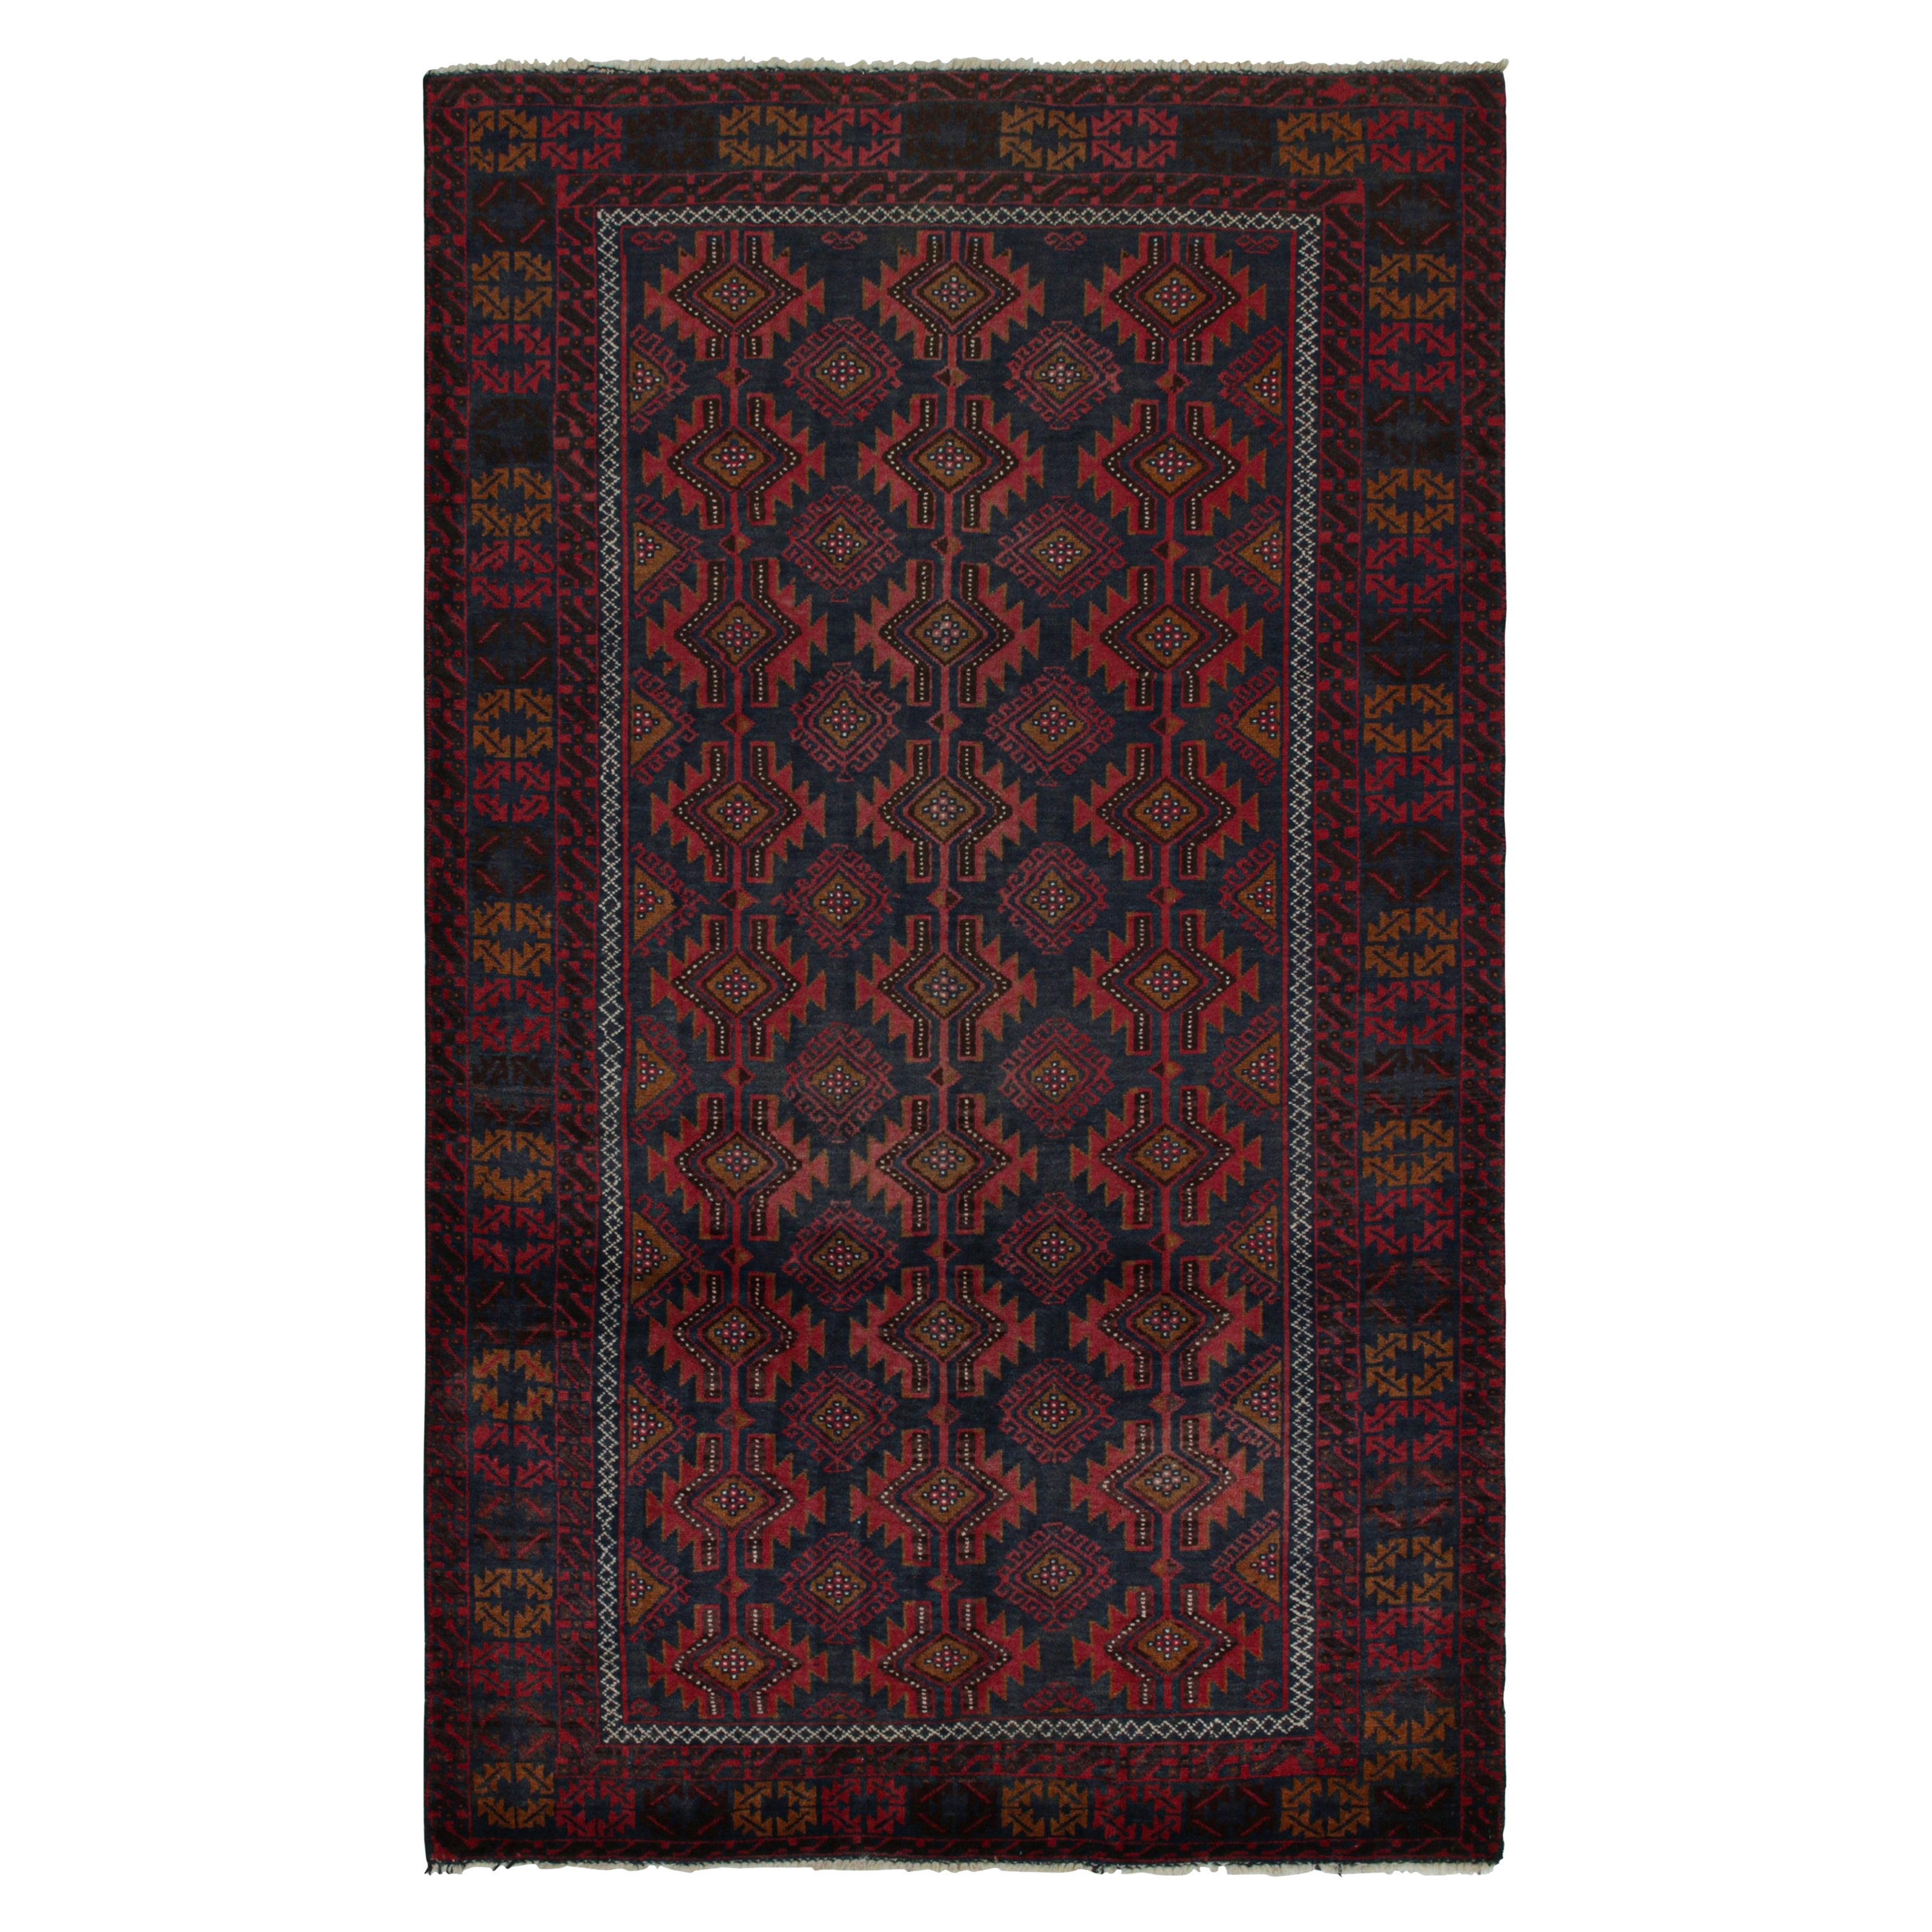 Vintage Baluch Persian rug in Red & Brown on Blue Patterns from Rug & Kilim